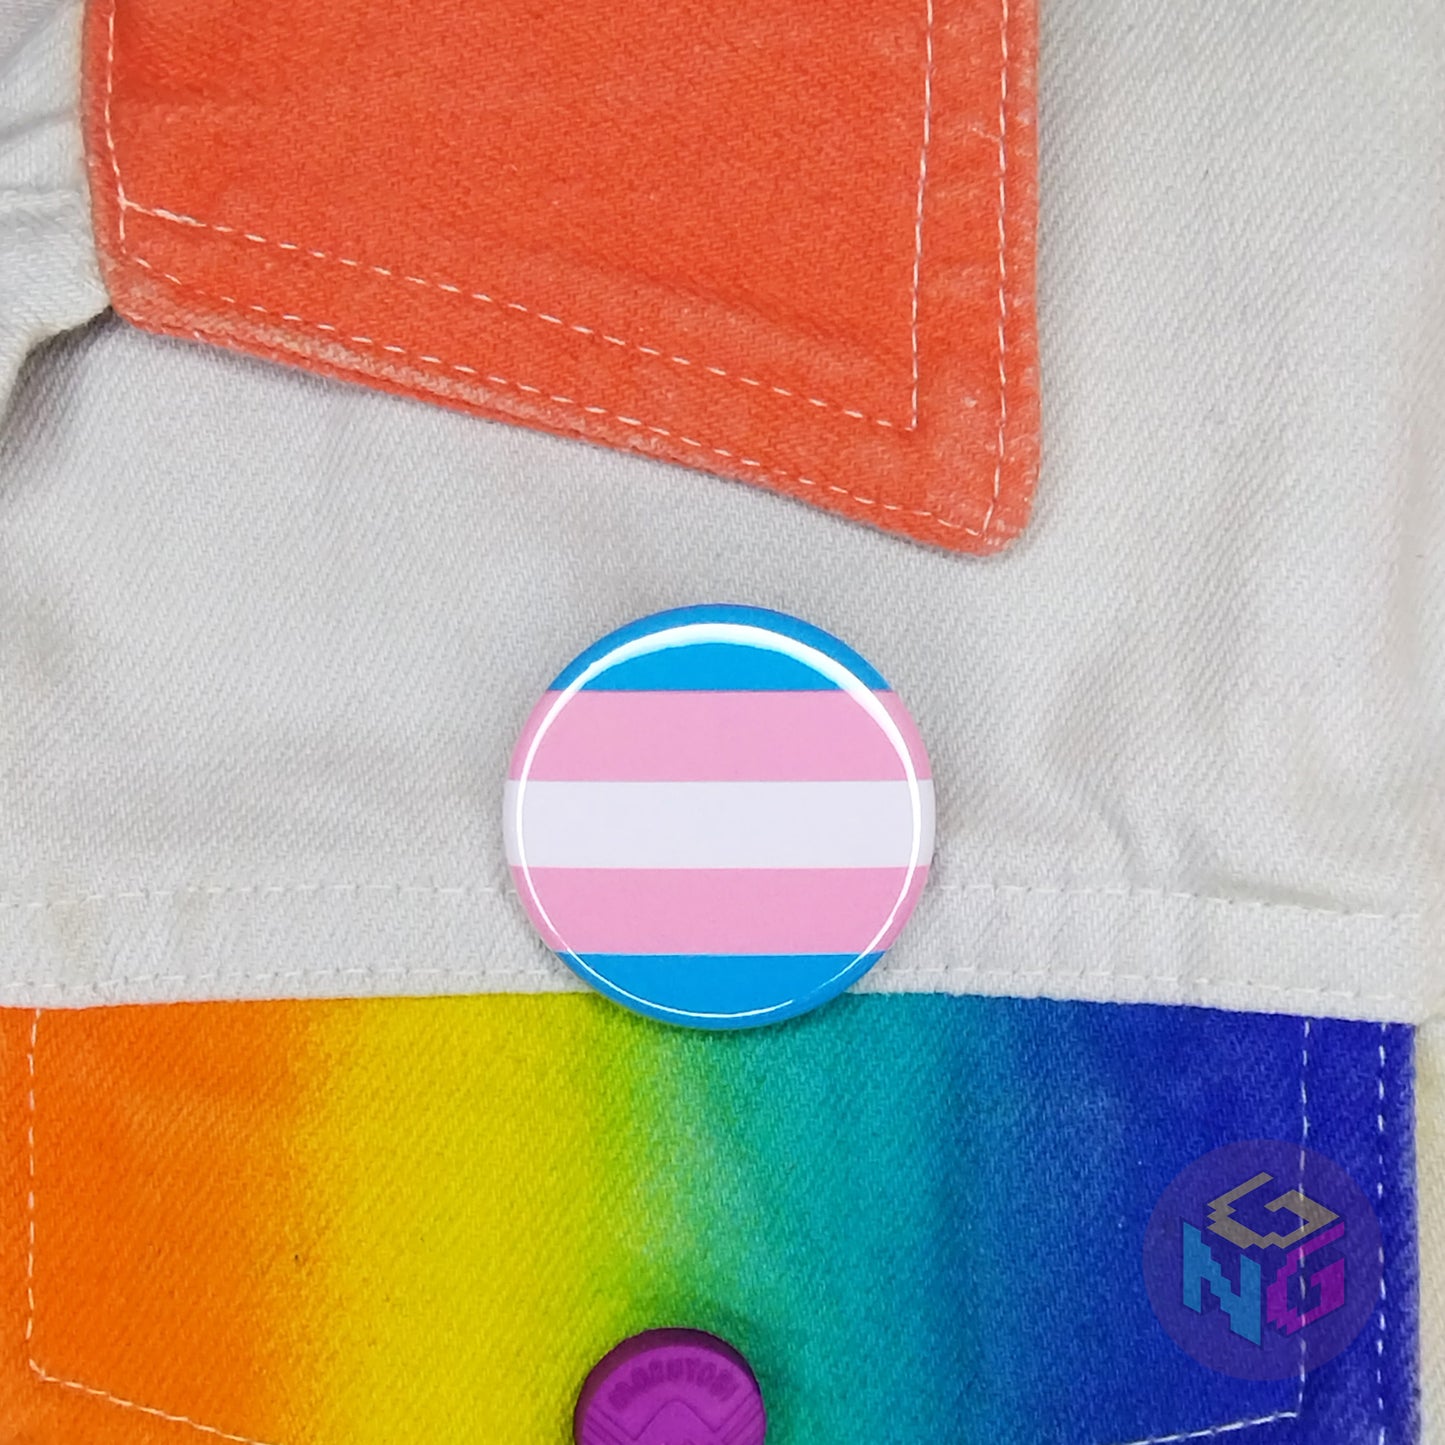 round transgender flag pin attached to a white and rainbow denim jacket